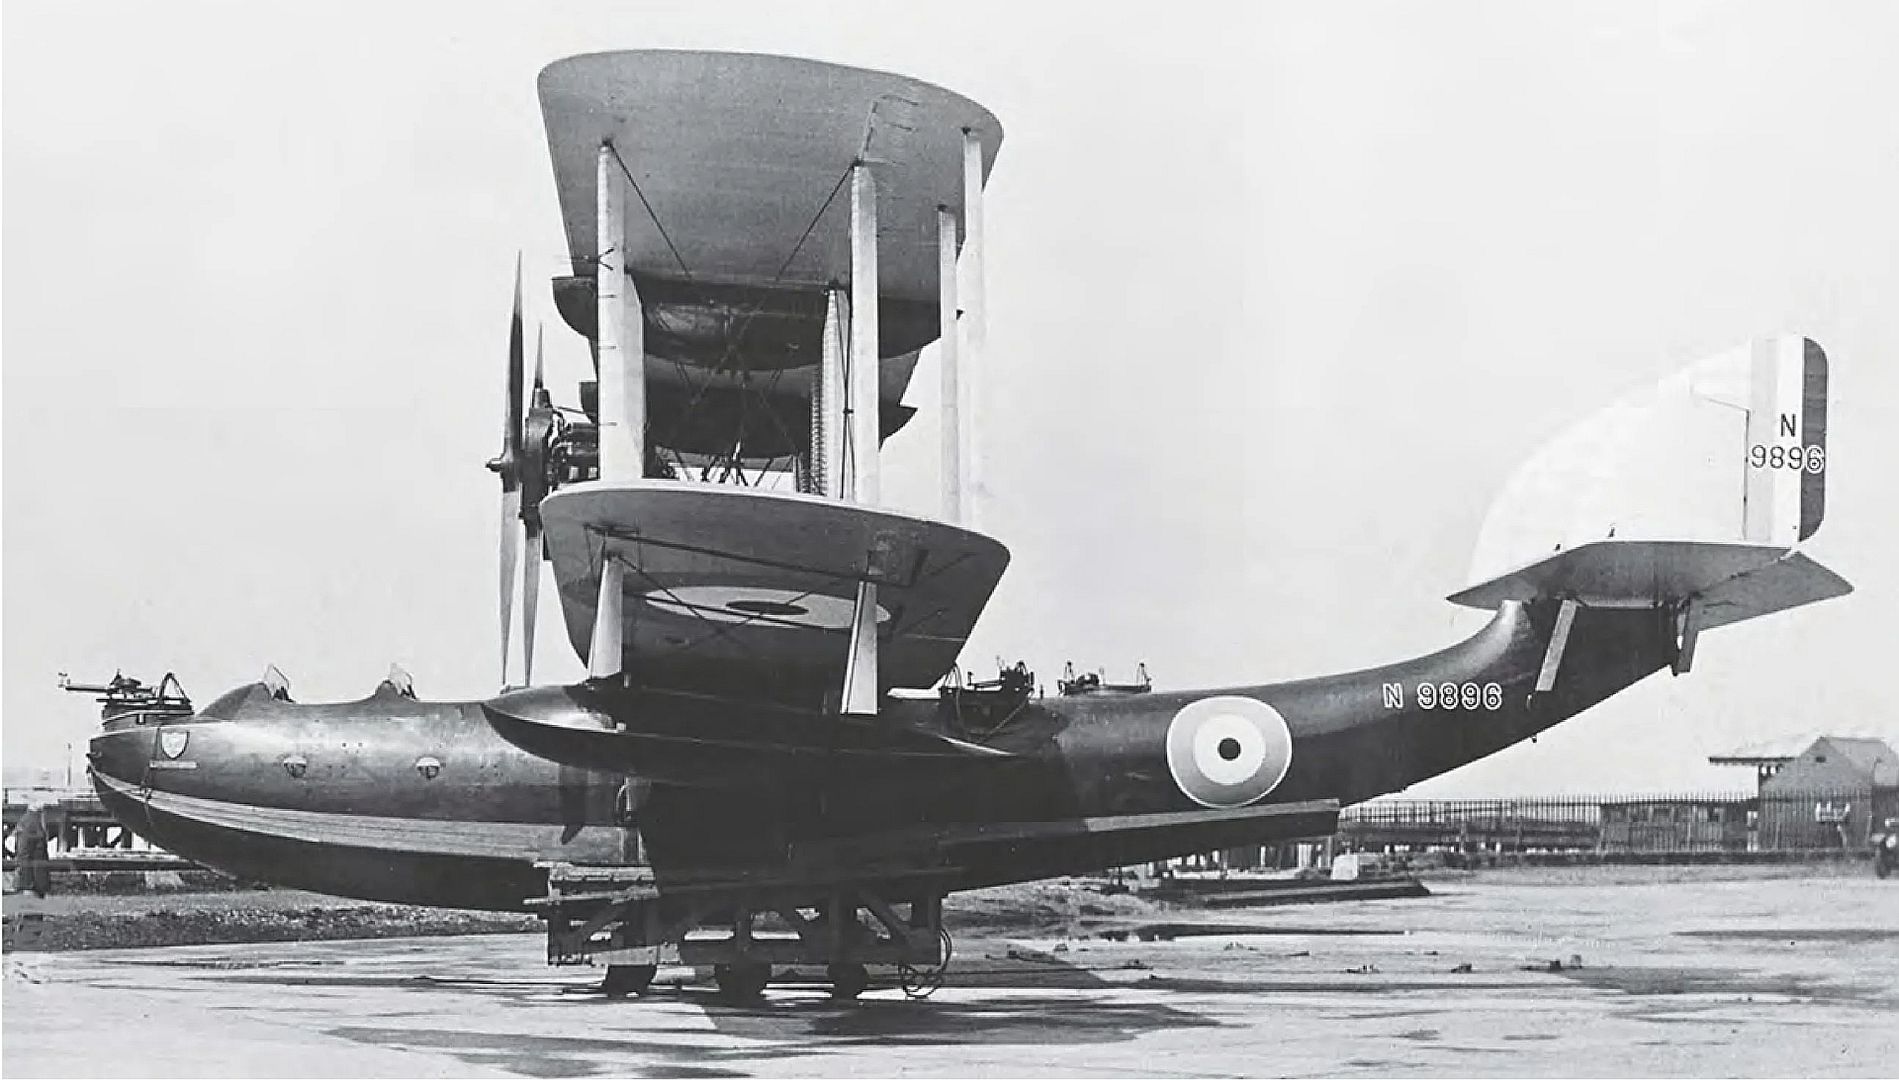 The Very First Southampton N9896 With The City S Coat Of Arms On The Nose